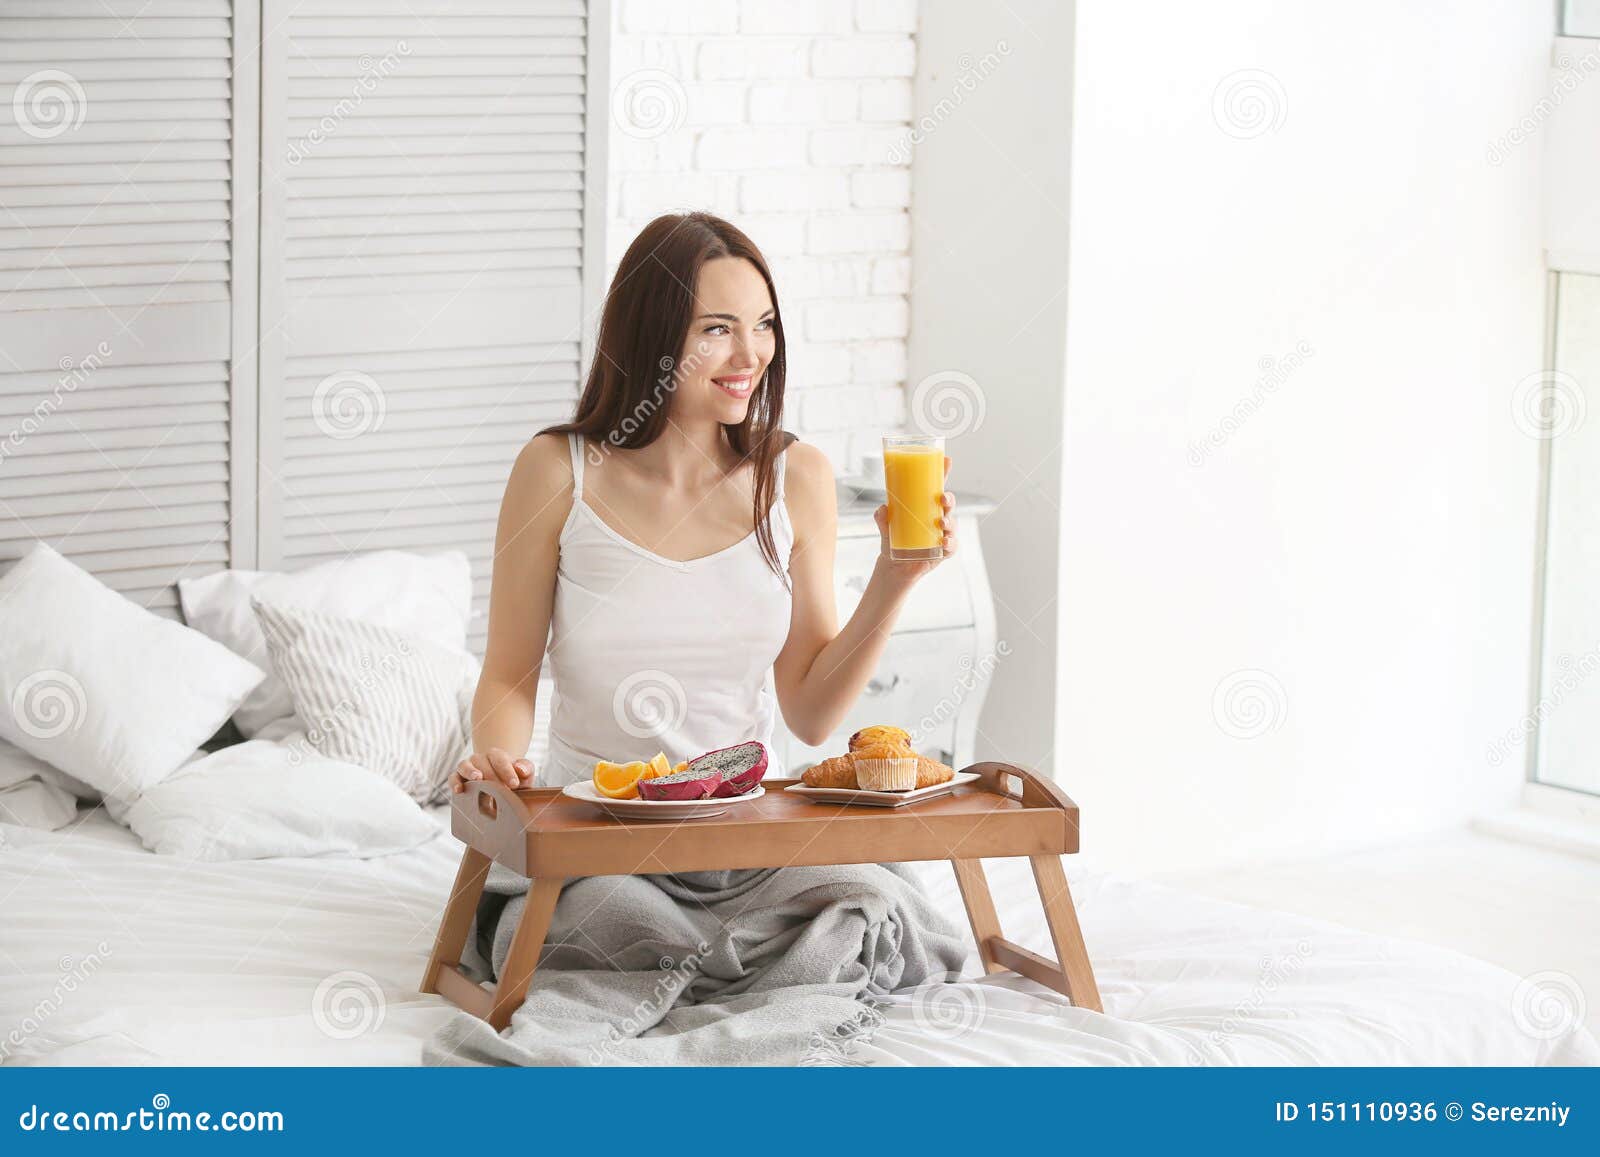 beautiful young woman having breakfast on bed at home